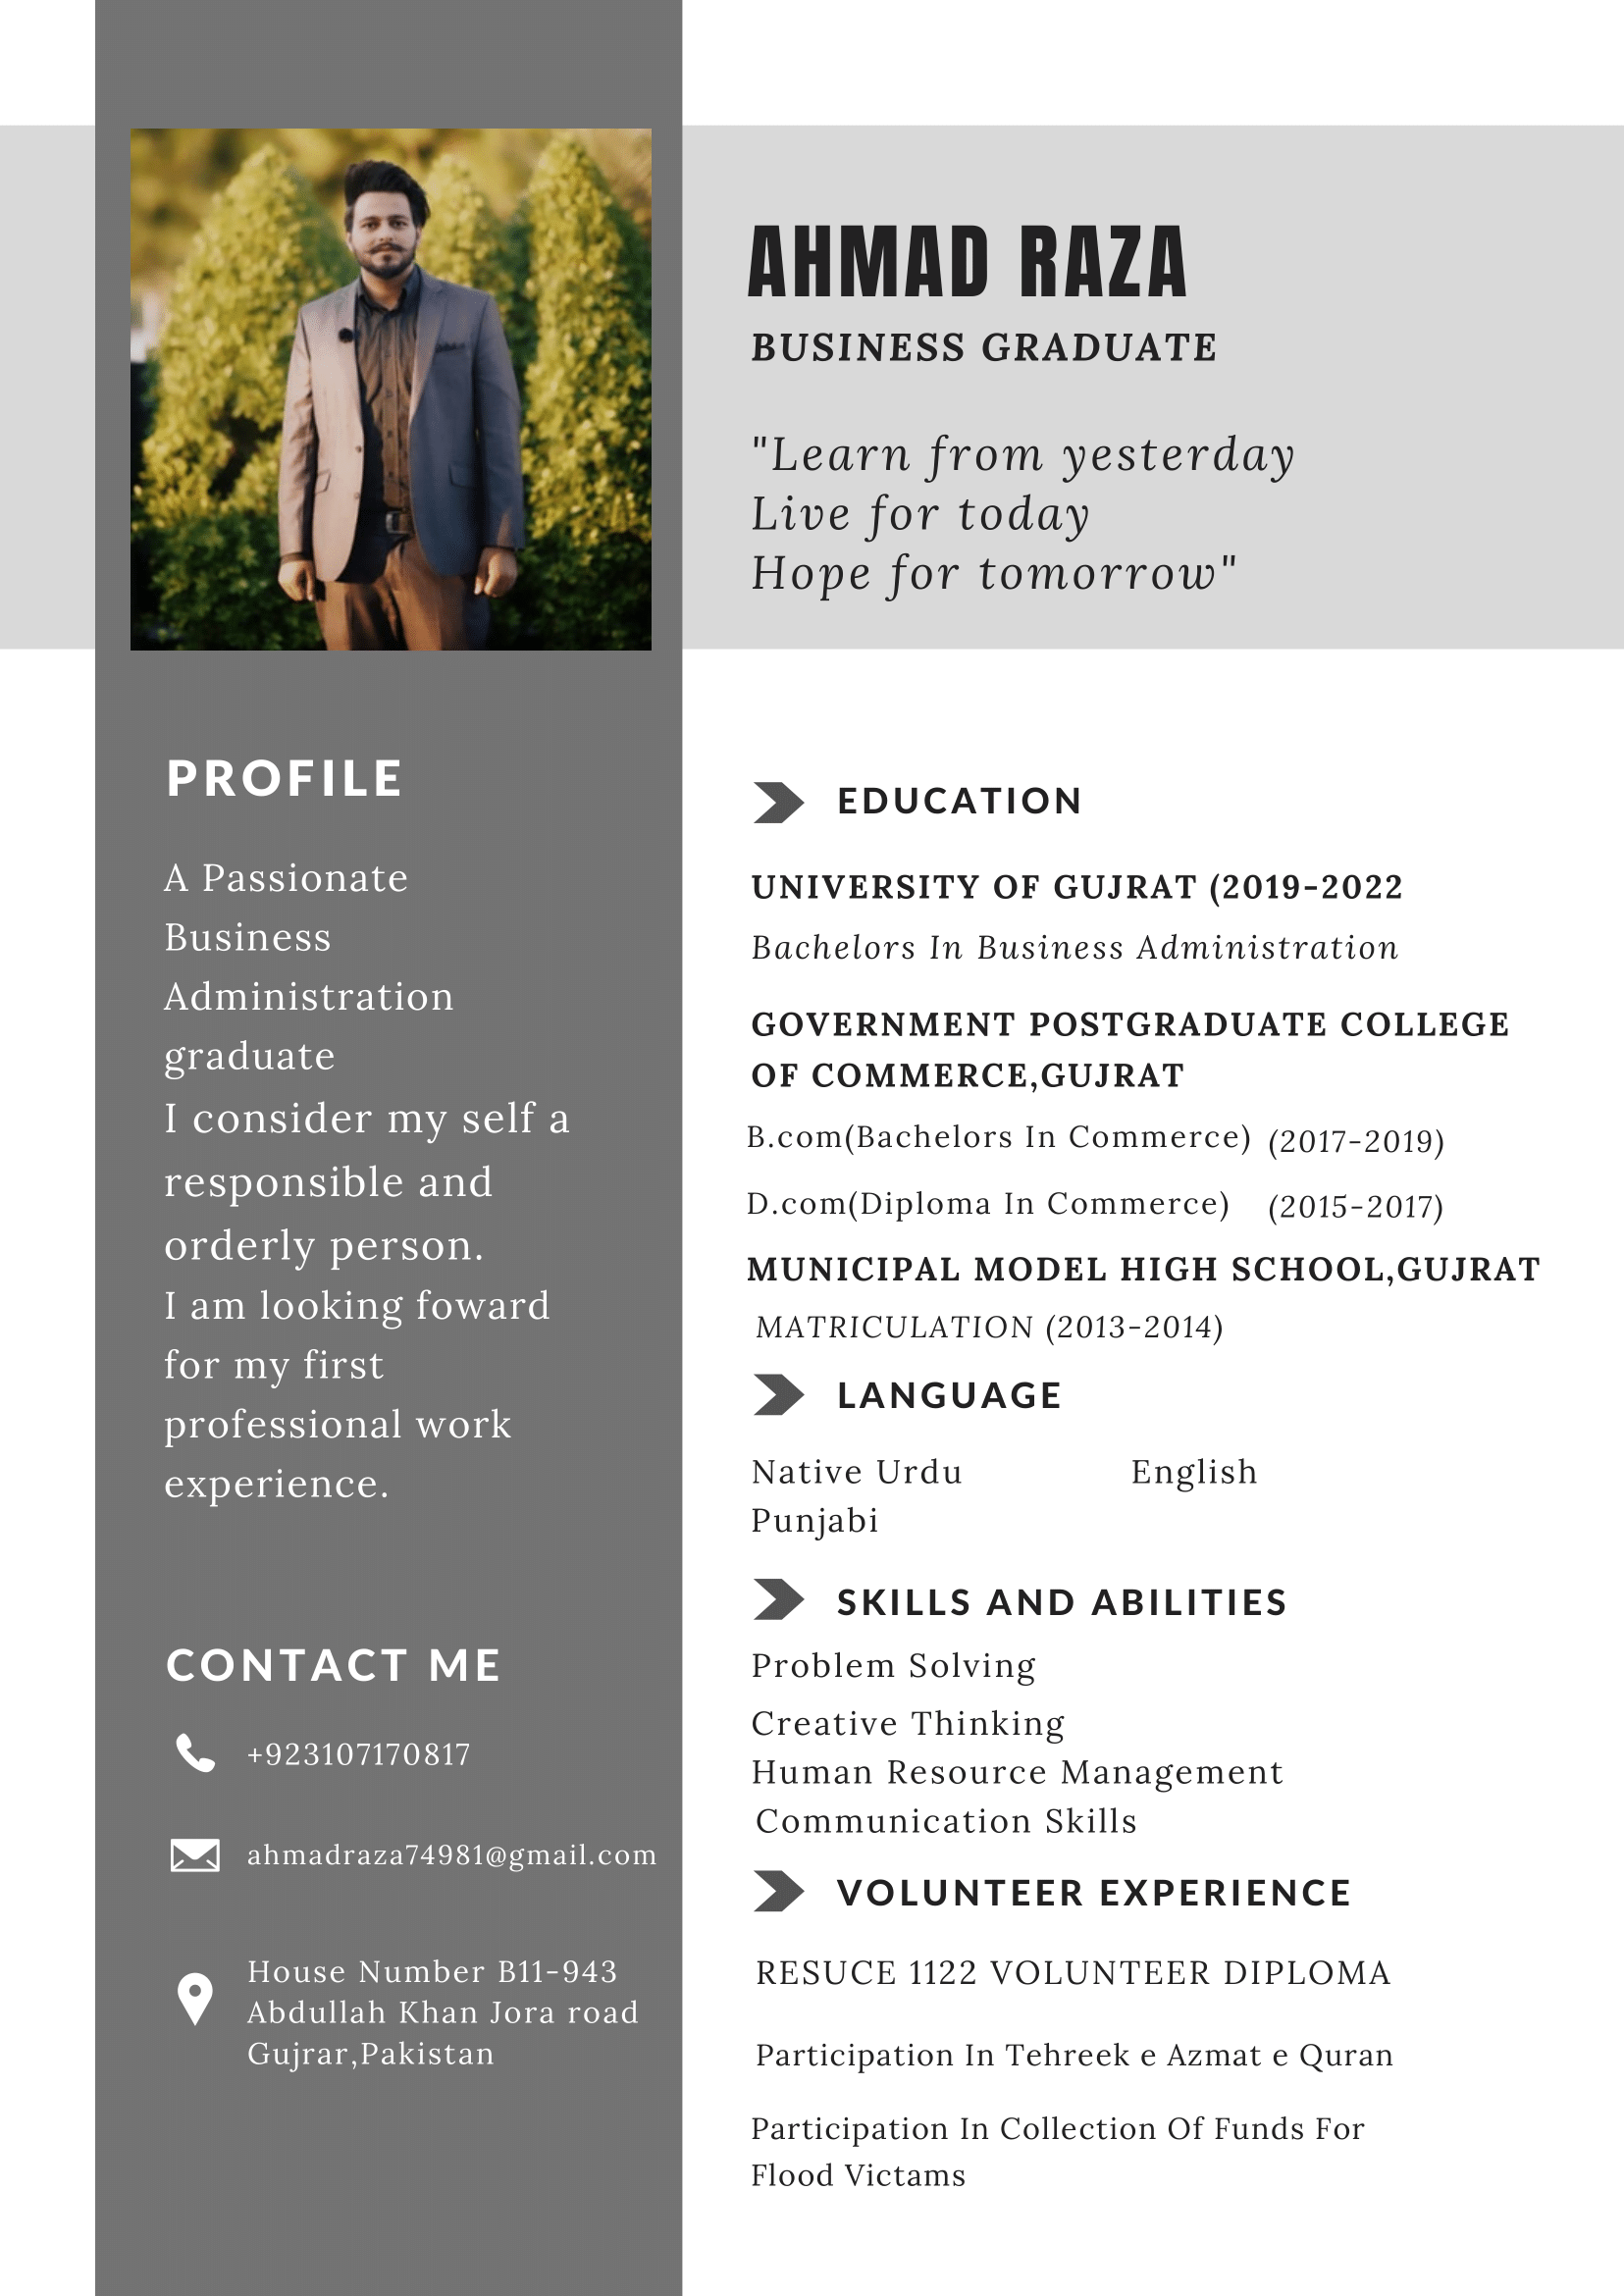 I Will Design & Craft Modern Eye catching Resume For You.